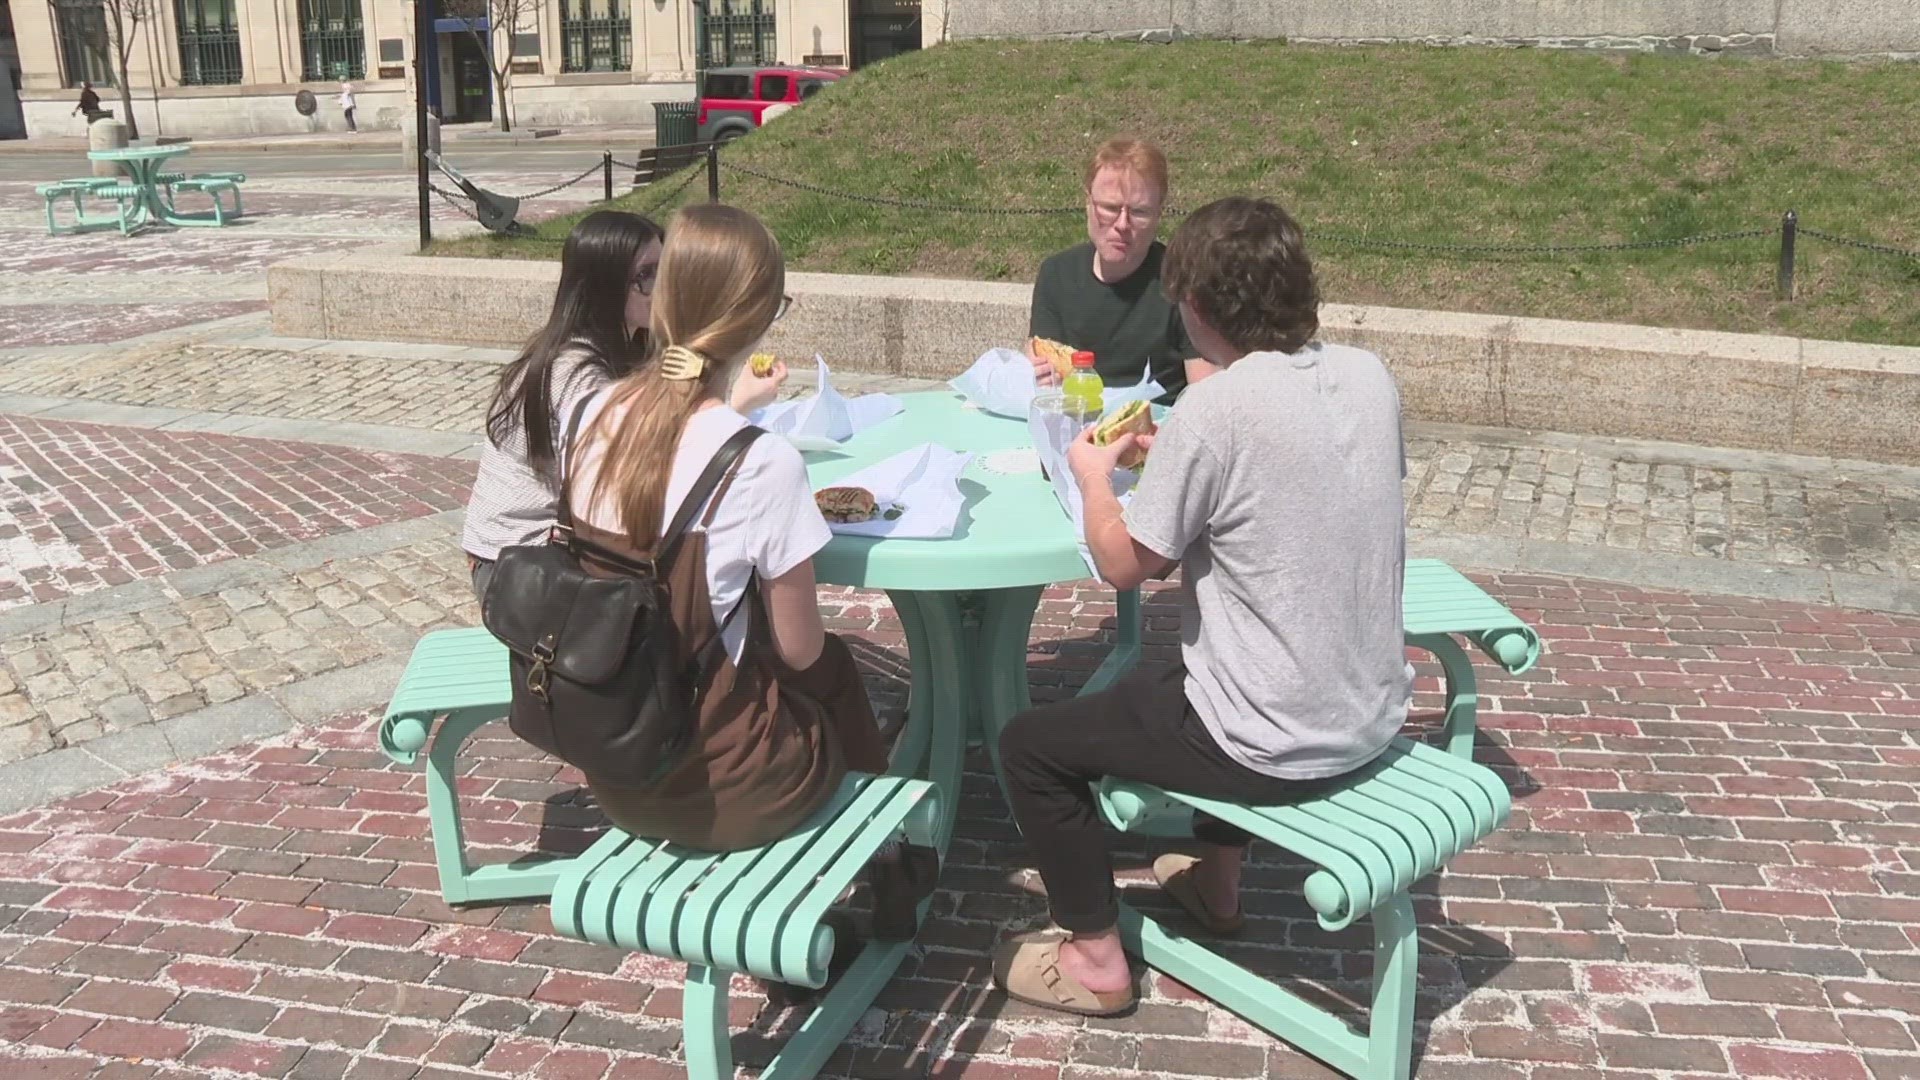 Many local businesses are taking advantage of Friday's warm weather and bringing back outdoor dining setups.